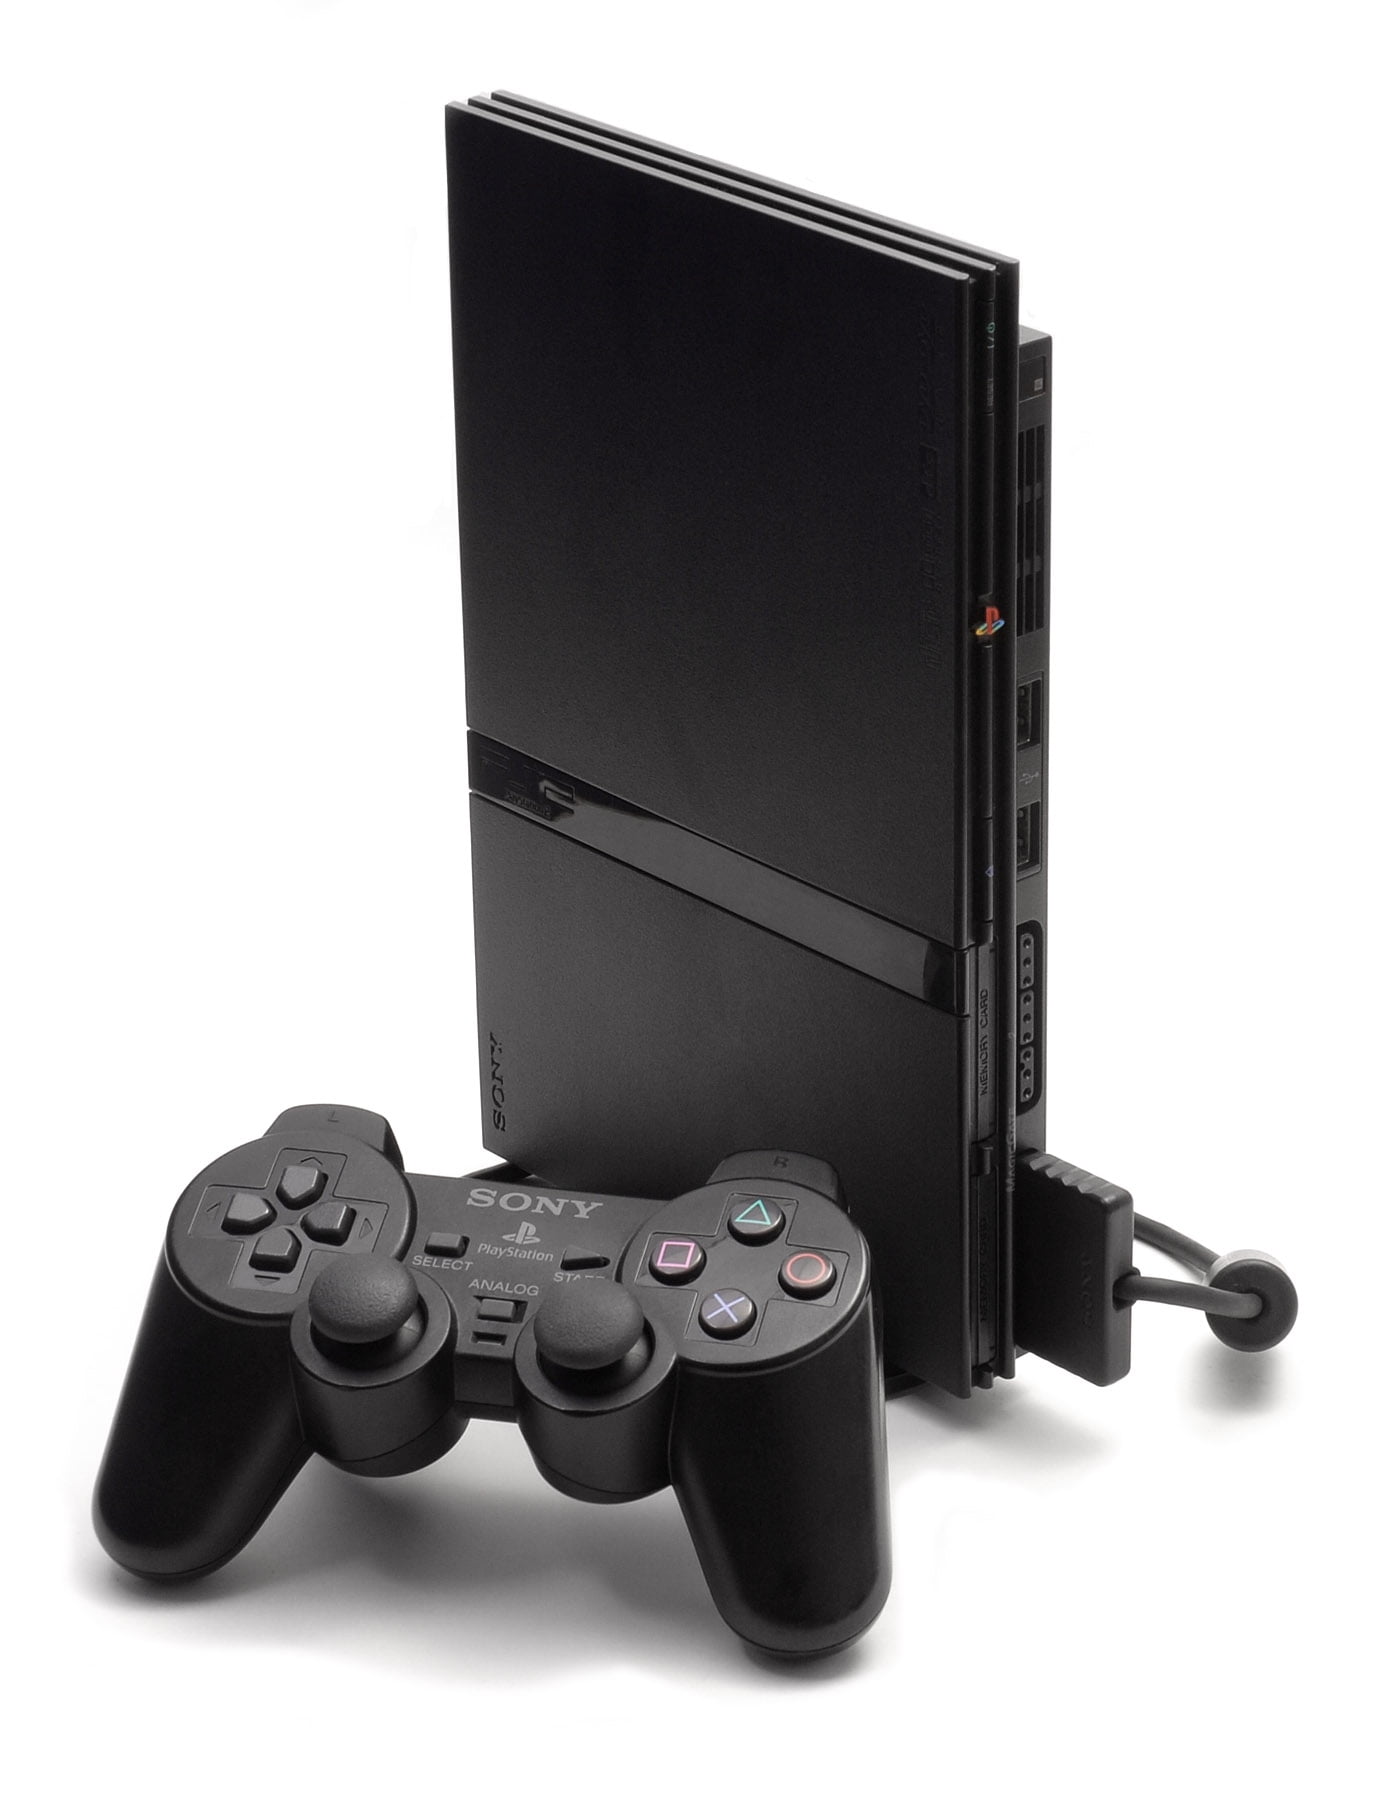 Restored PlayStation 2 Slim Console with Controller and 8MB Memory